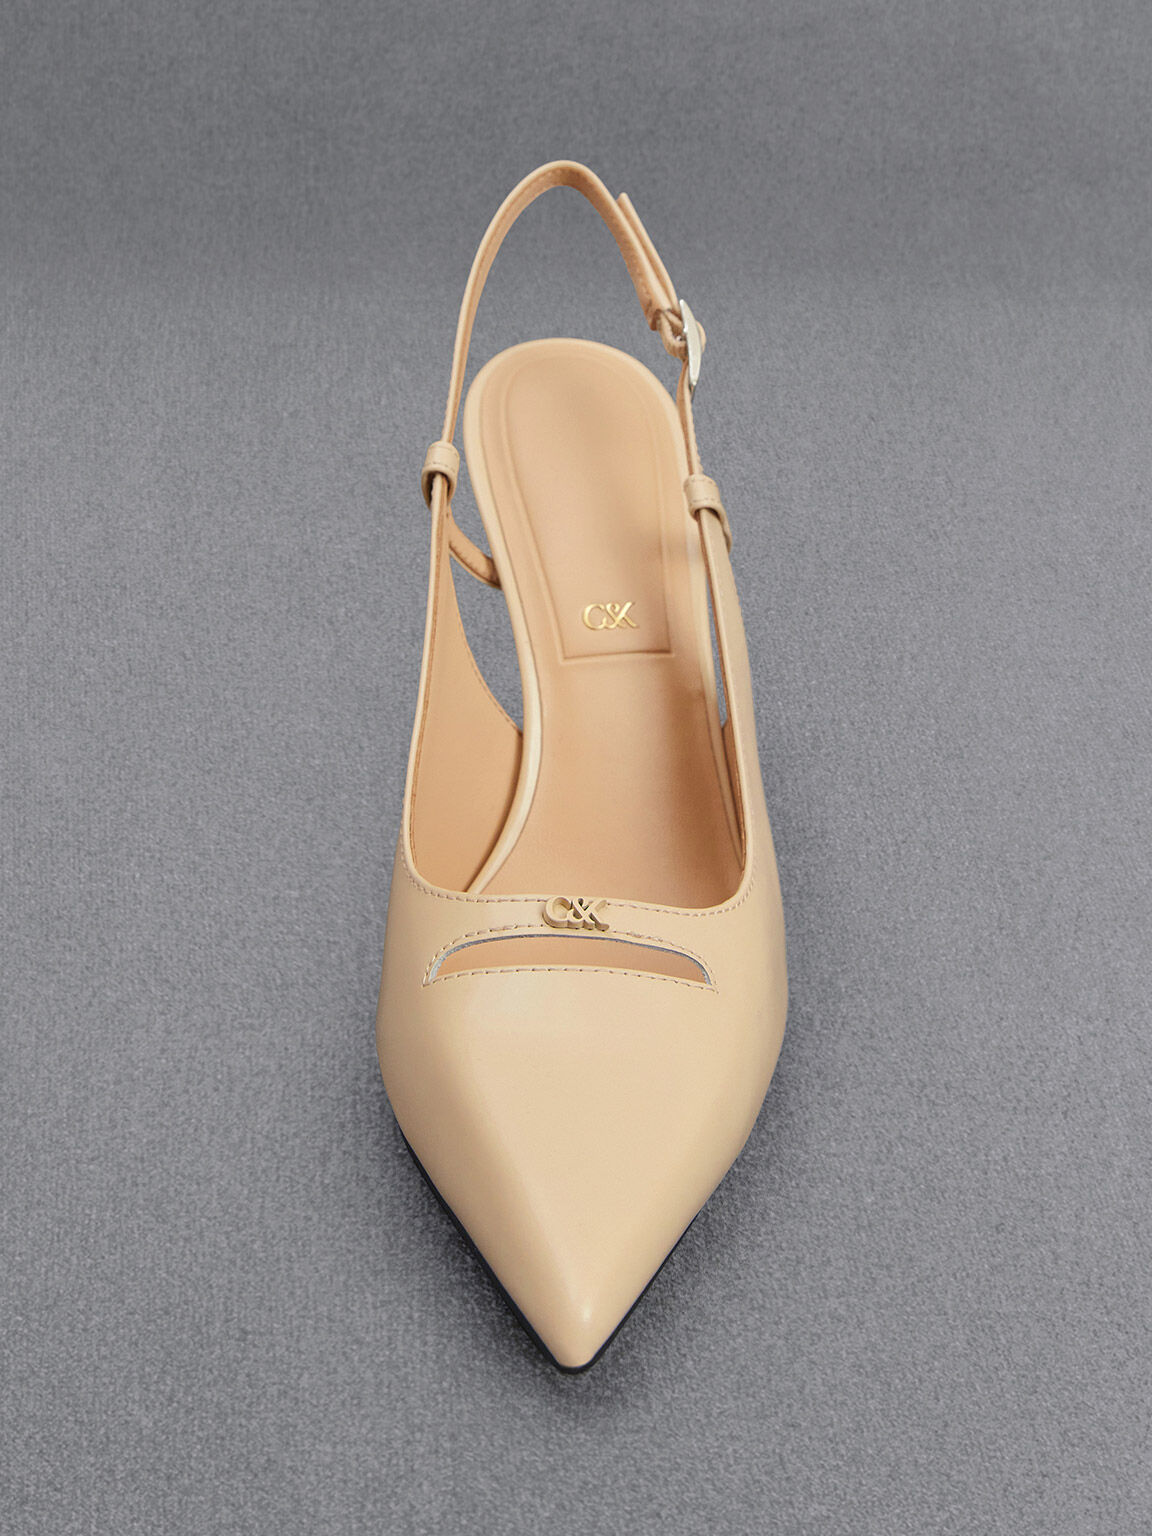 Vintage Louis Vuitton Beige Pumps/Heels with Pointed Toe – The Curatorial  Dept.